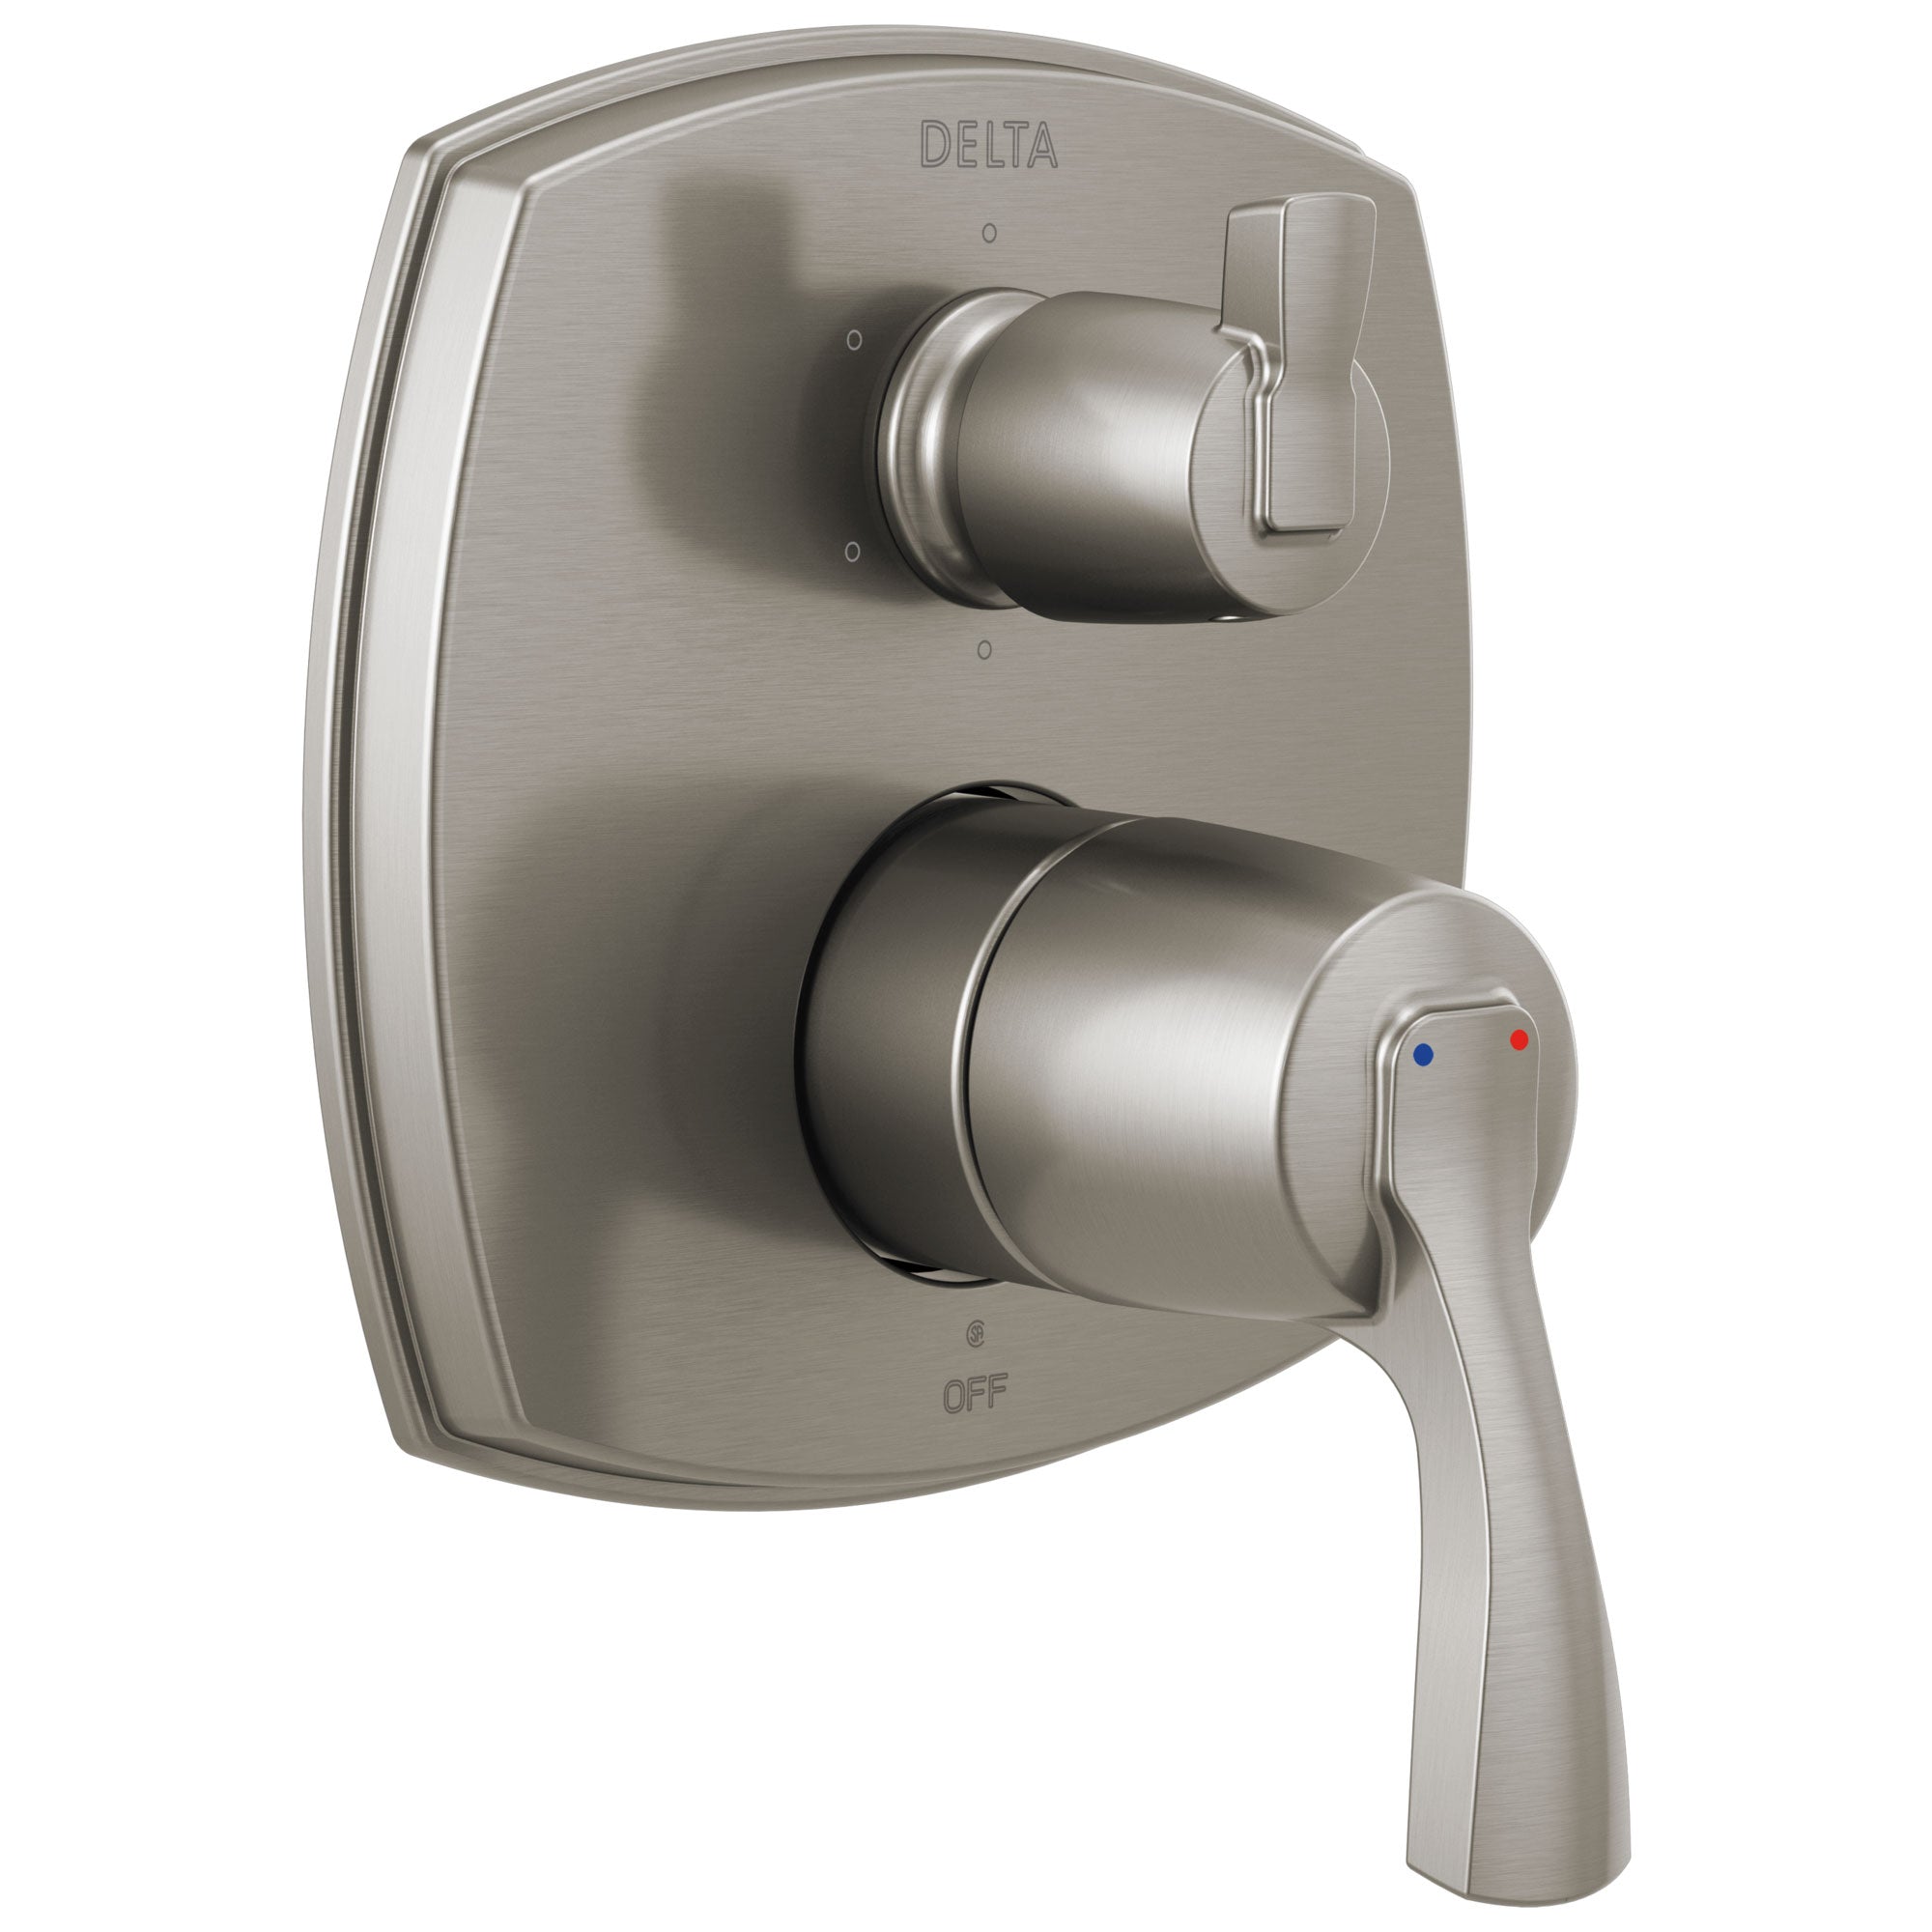 Delta Stryke Stainless Steel Finish 14 Series Shower System Control with Integrated 6 Function Lever Handle Diverter Includes Valve and Handles D3173V